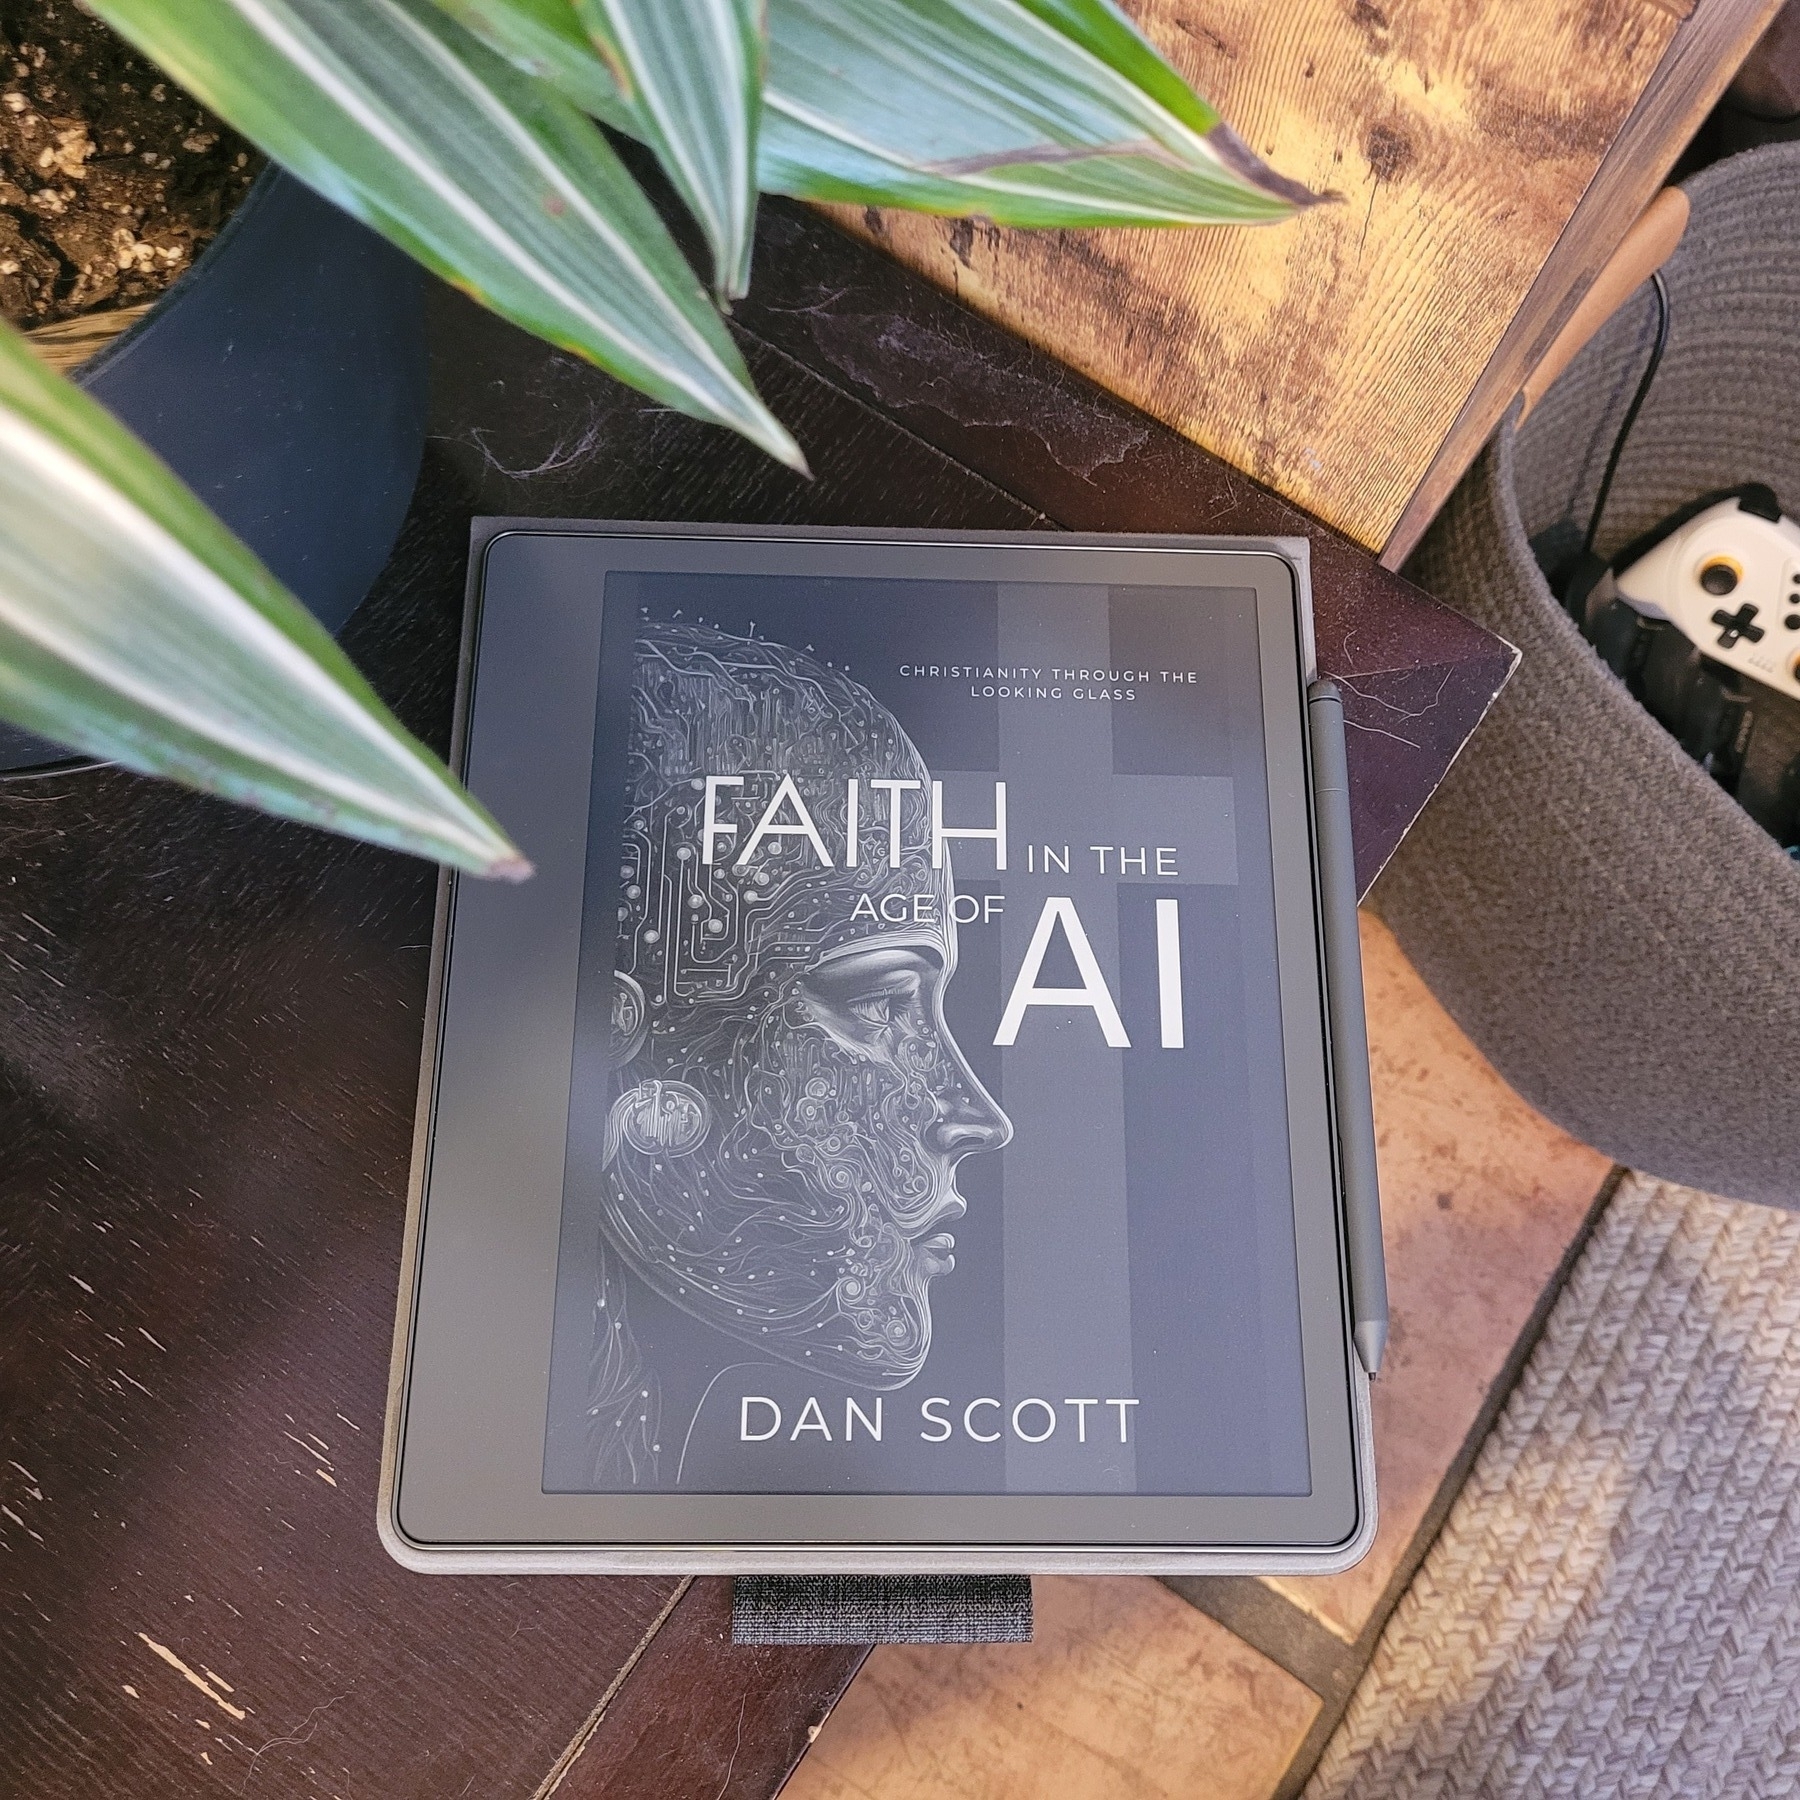 Kindle Scribe Tablet showing cover for Faith in the Age of AI by Dan Scott